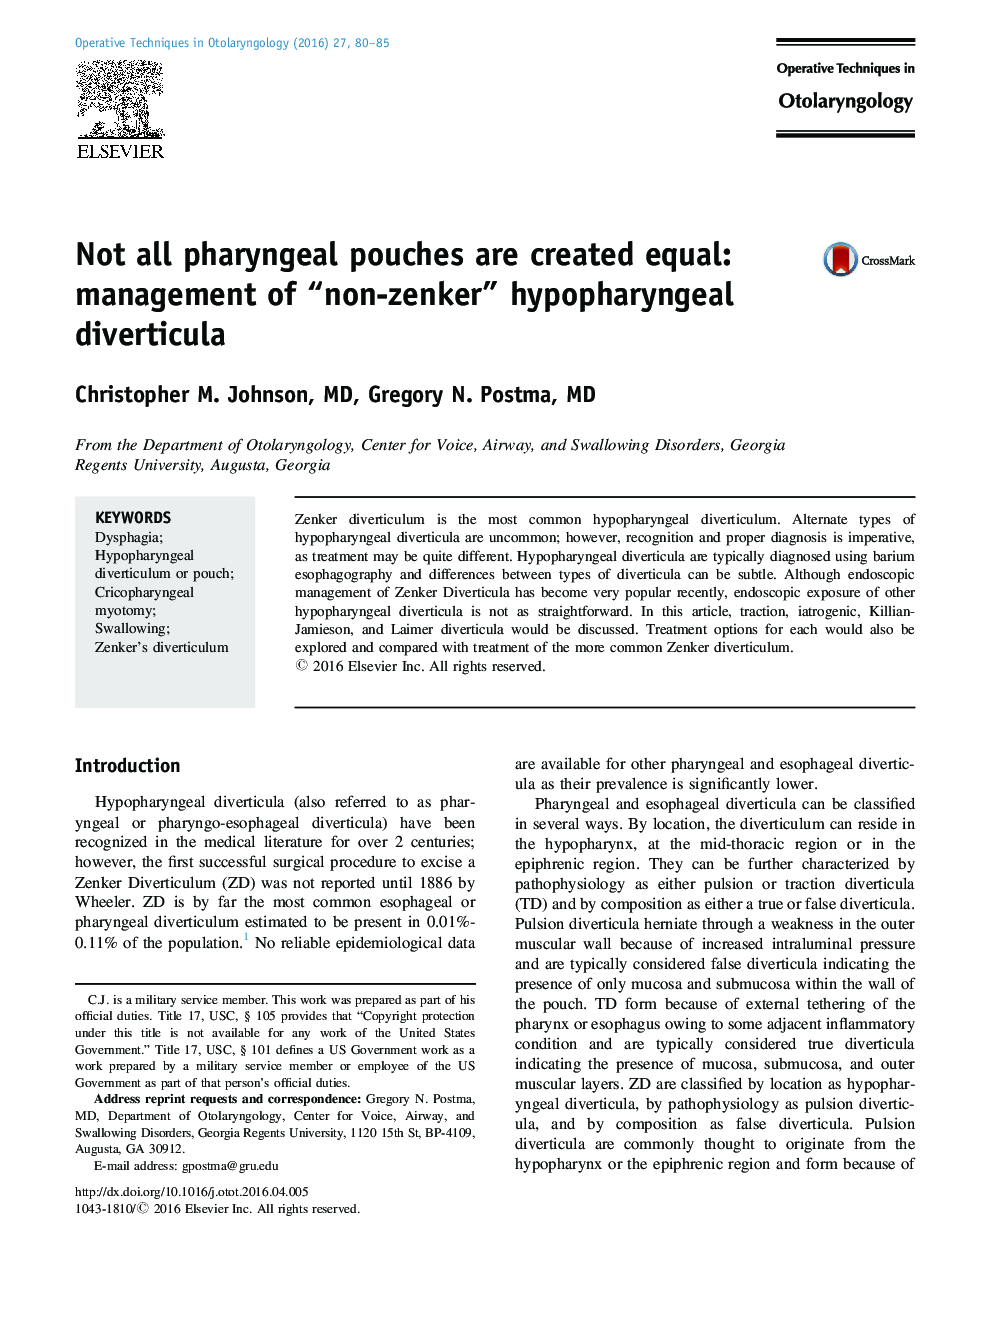 Not all pharyngeal pouches are created equal: management of “non-zenker” hypopharyngeal diverticula 